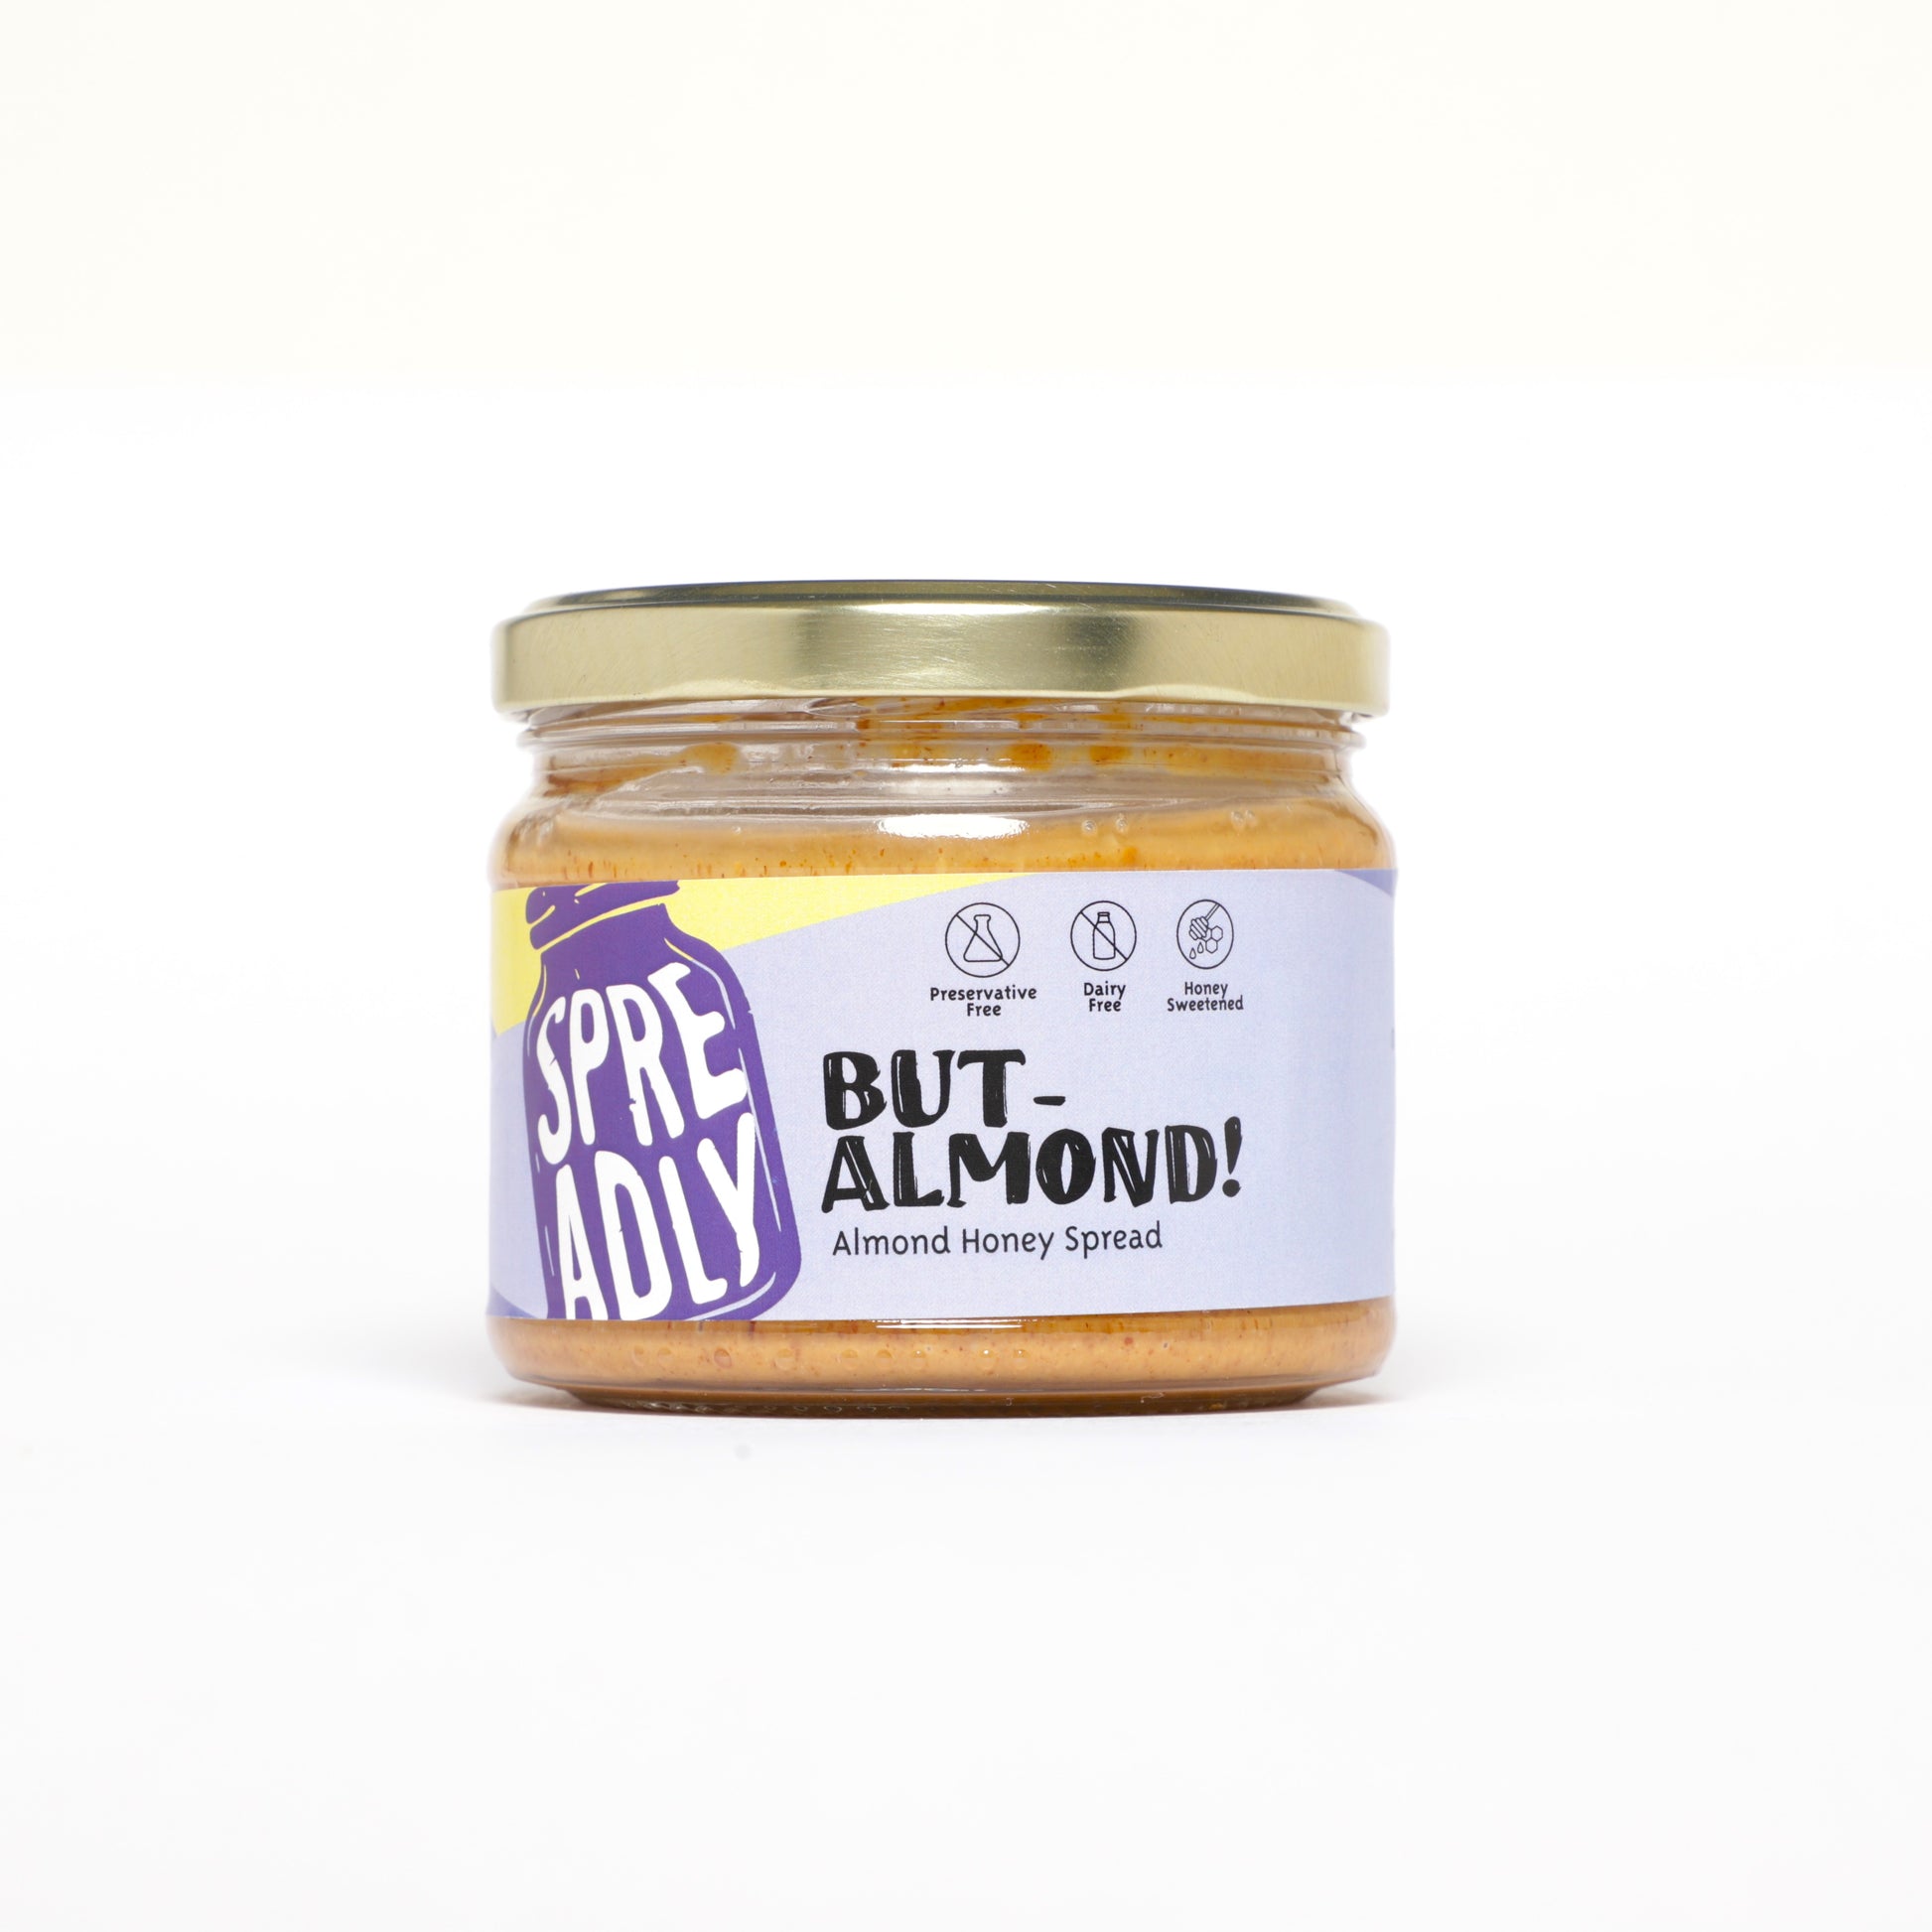 Natural Almond Honey Spread made with dry roasted almonds, sweetened with honey. Free of preservatives, dairy free and palm oil free 